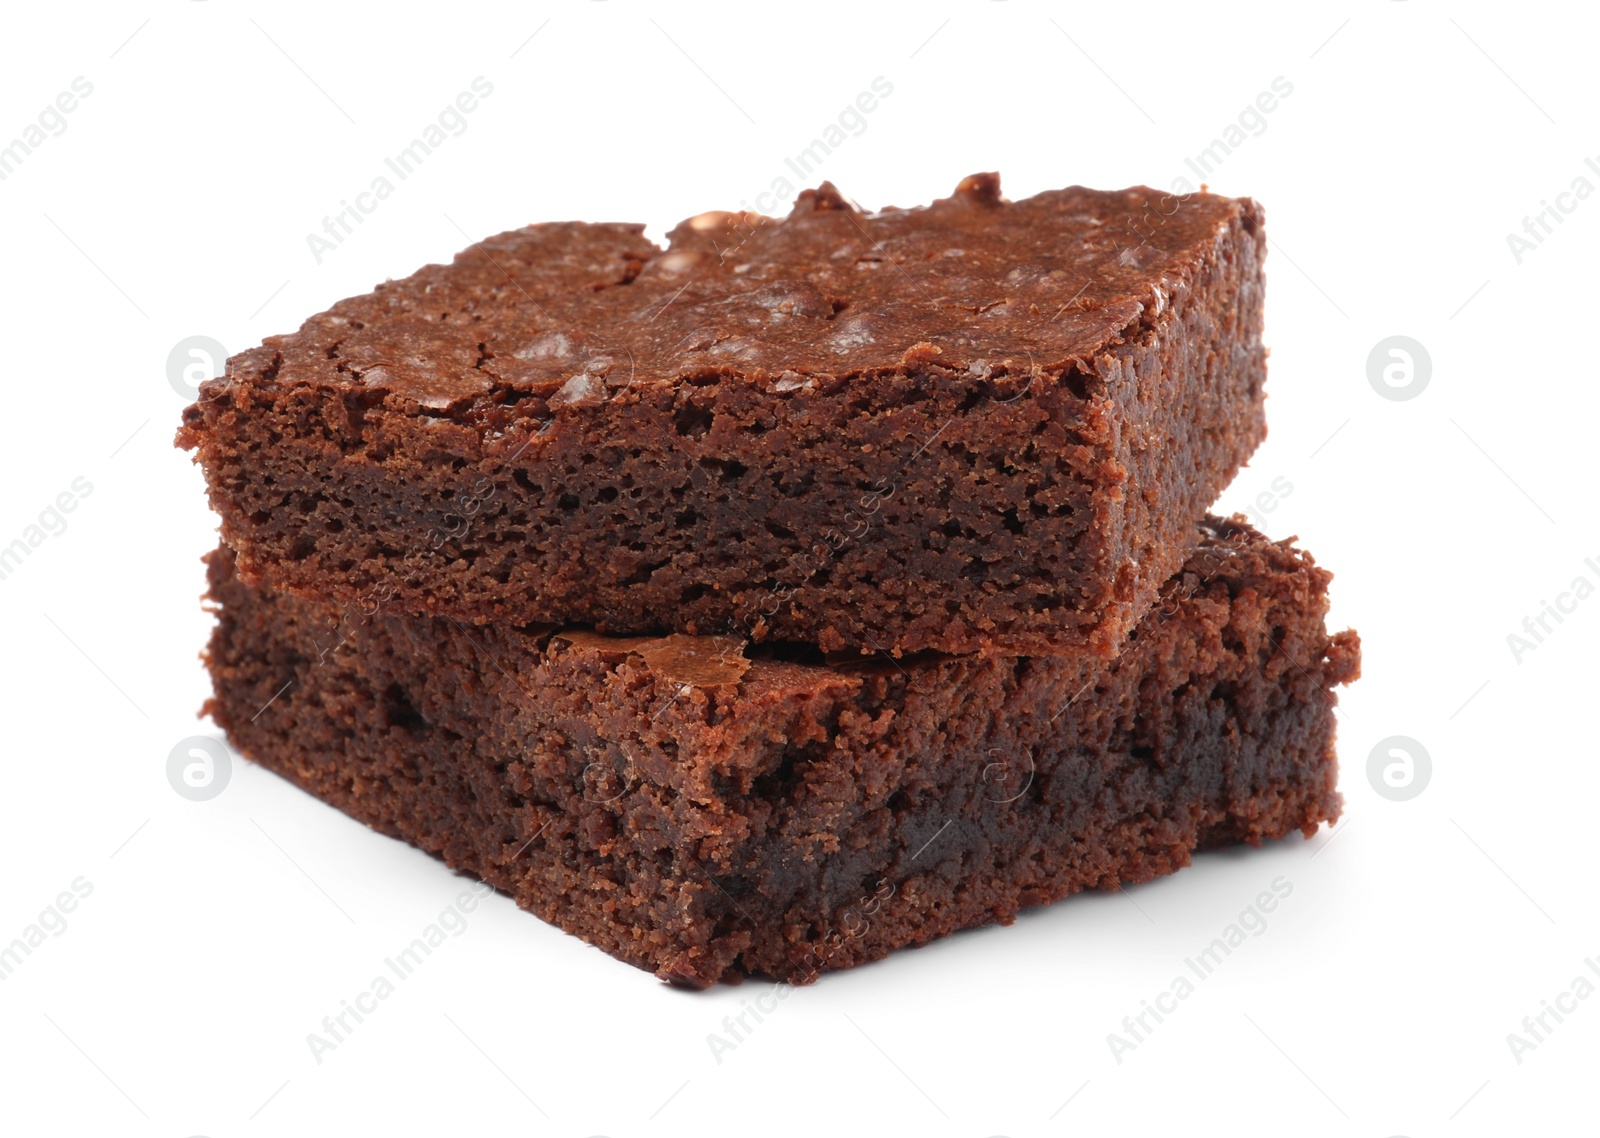 Photo of Delicious chocolate brownies on white background. Tasty dessert